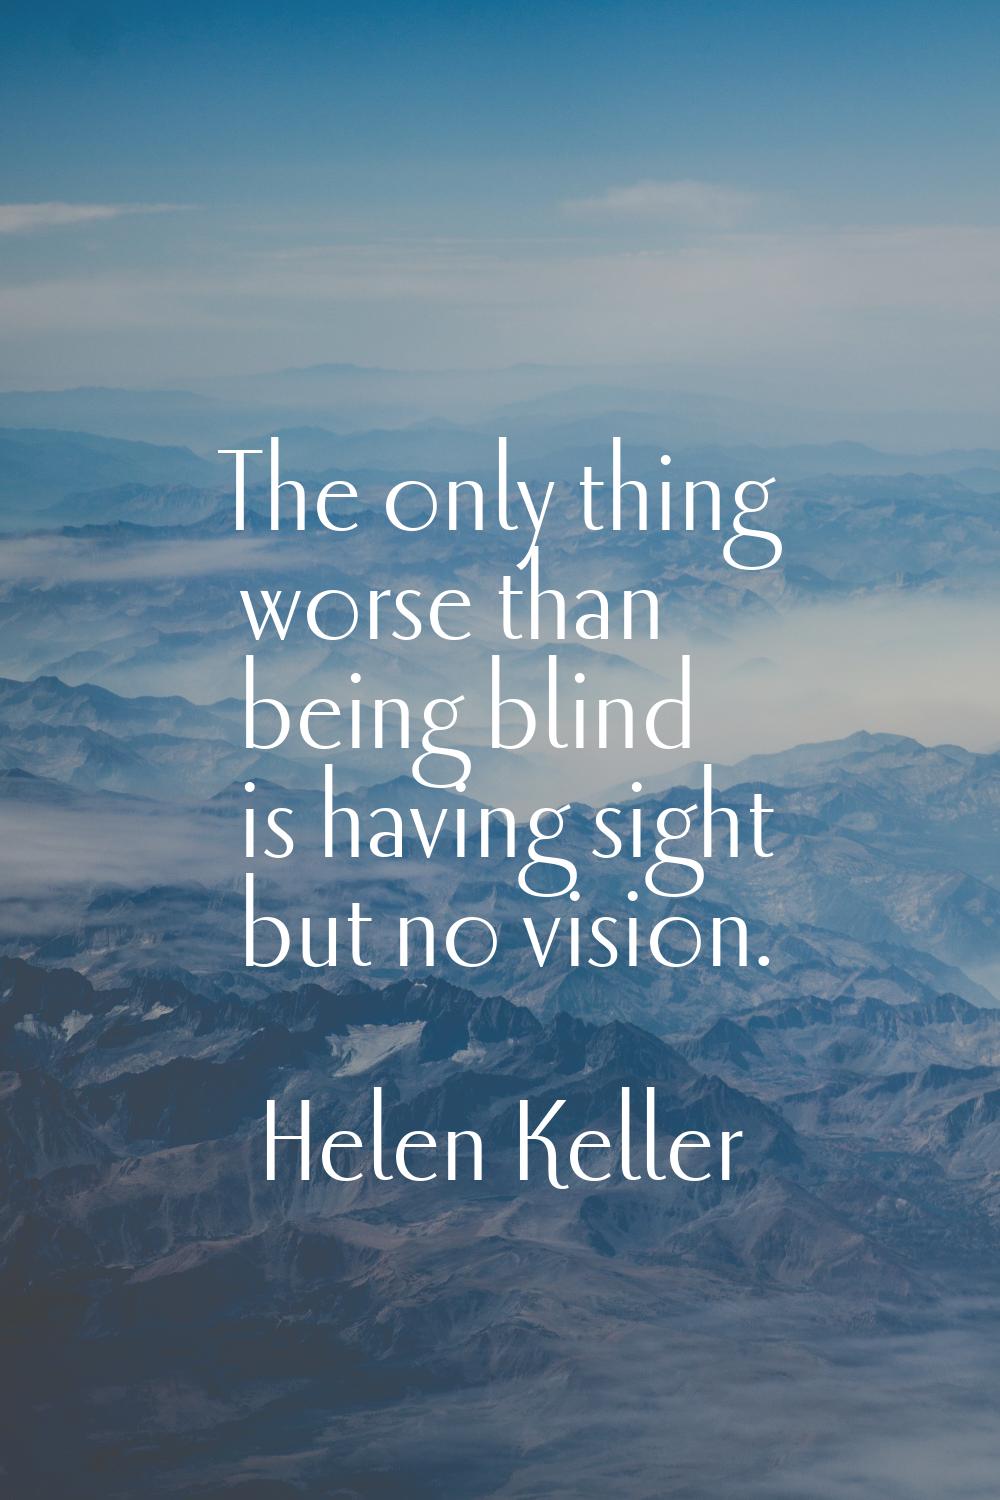 The only thing worse than being blind is having sight but no vision.